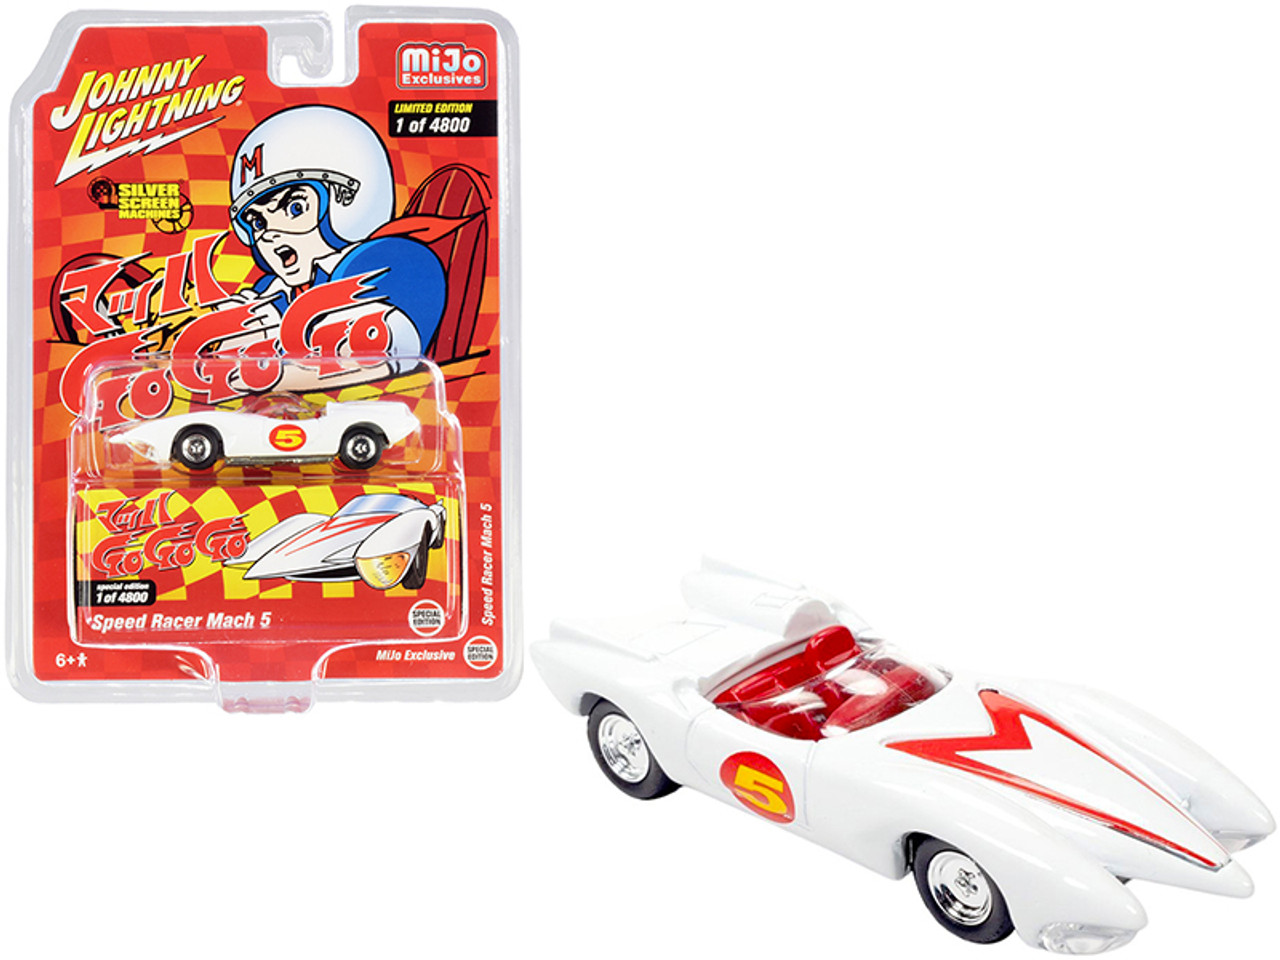 Speed Racer Mach 5 Five White "Japan Nostalgia Version" Limited Edition to 4800 pieces Worldwide 1/64 Diecast Model Car by Johnny Lightning